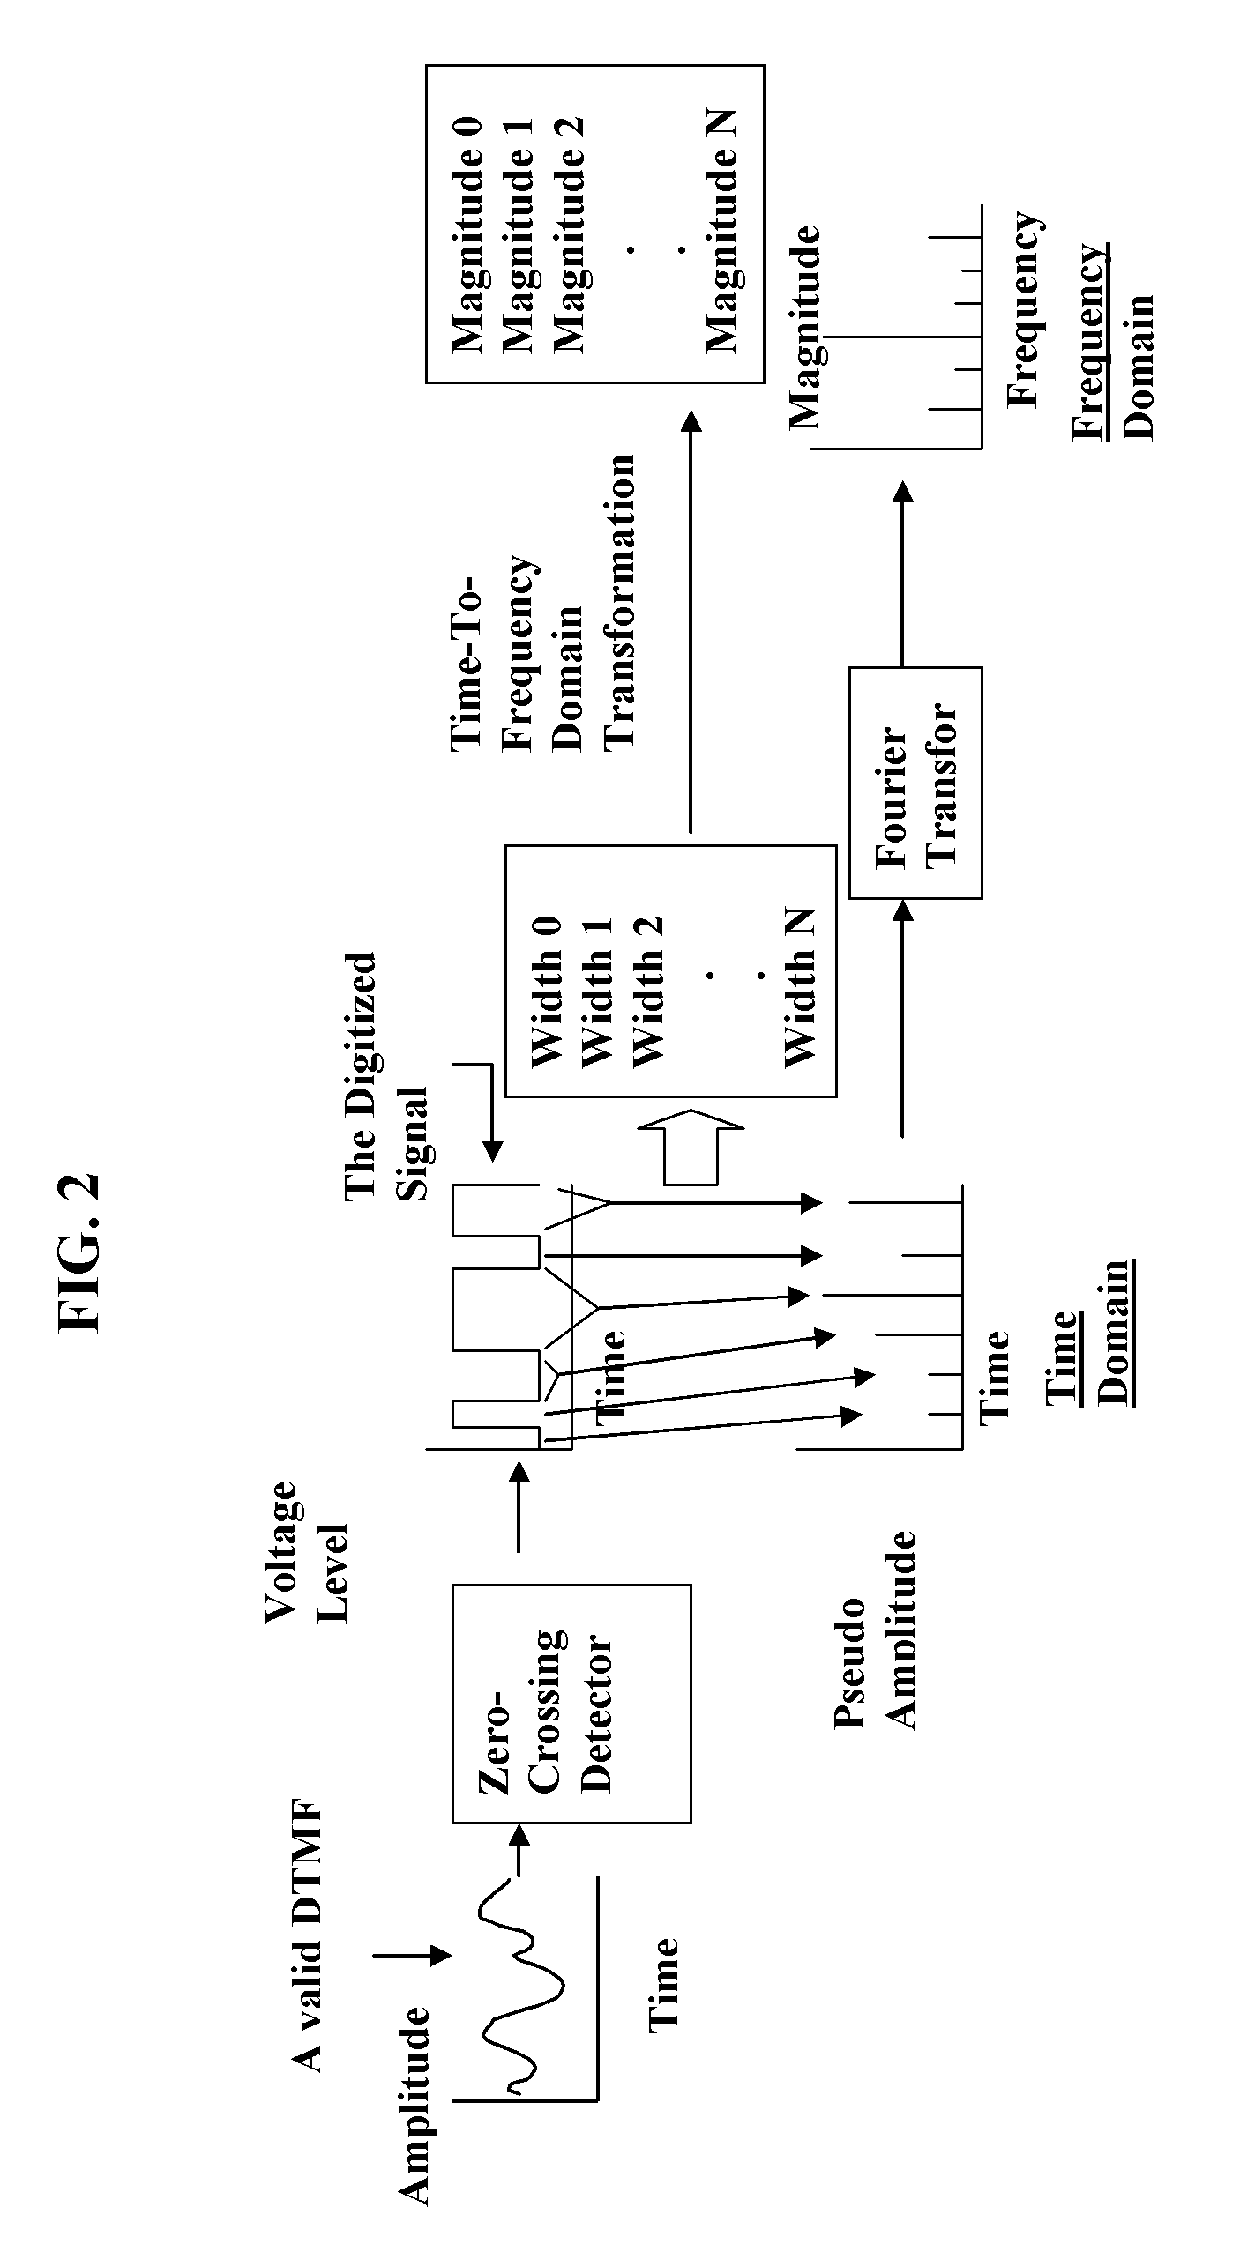 Method and apparatus for decoding DTMF tones